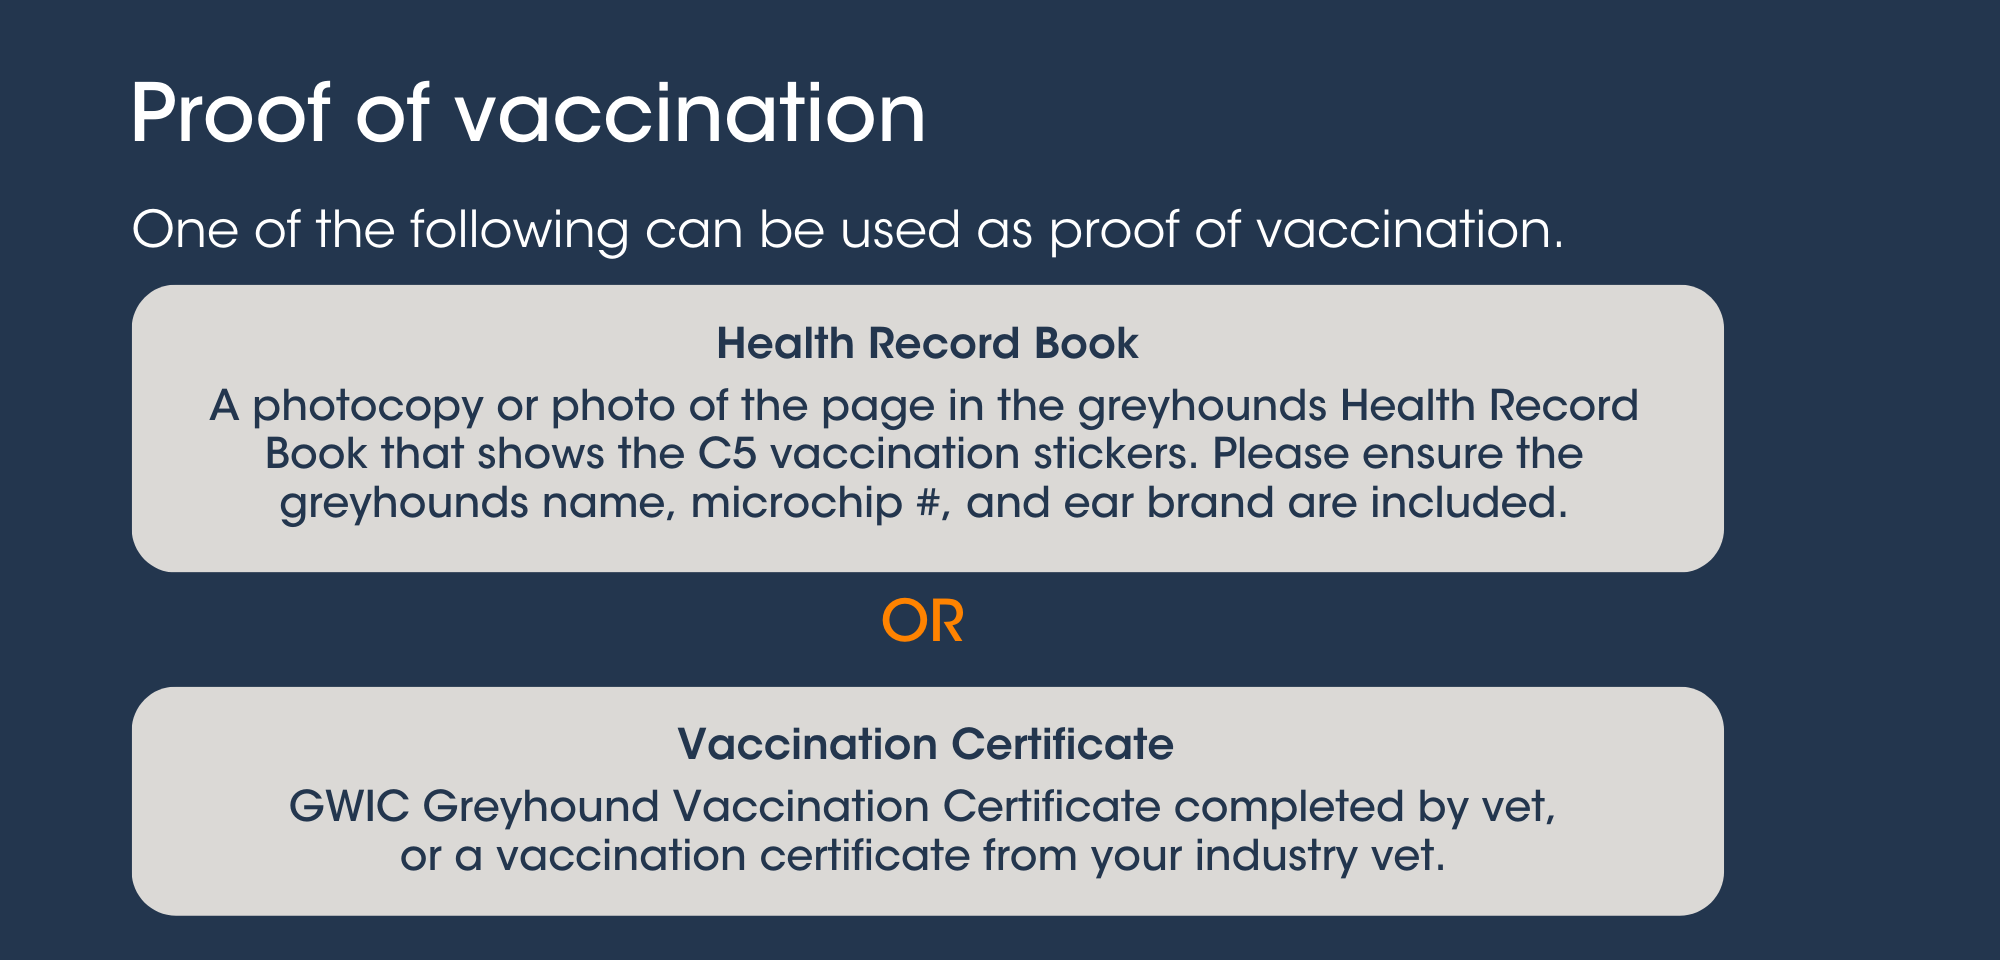 C5 vaccinations How to provide proof of vaccinations